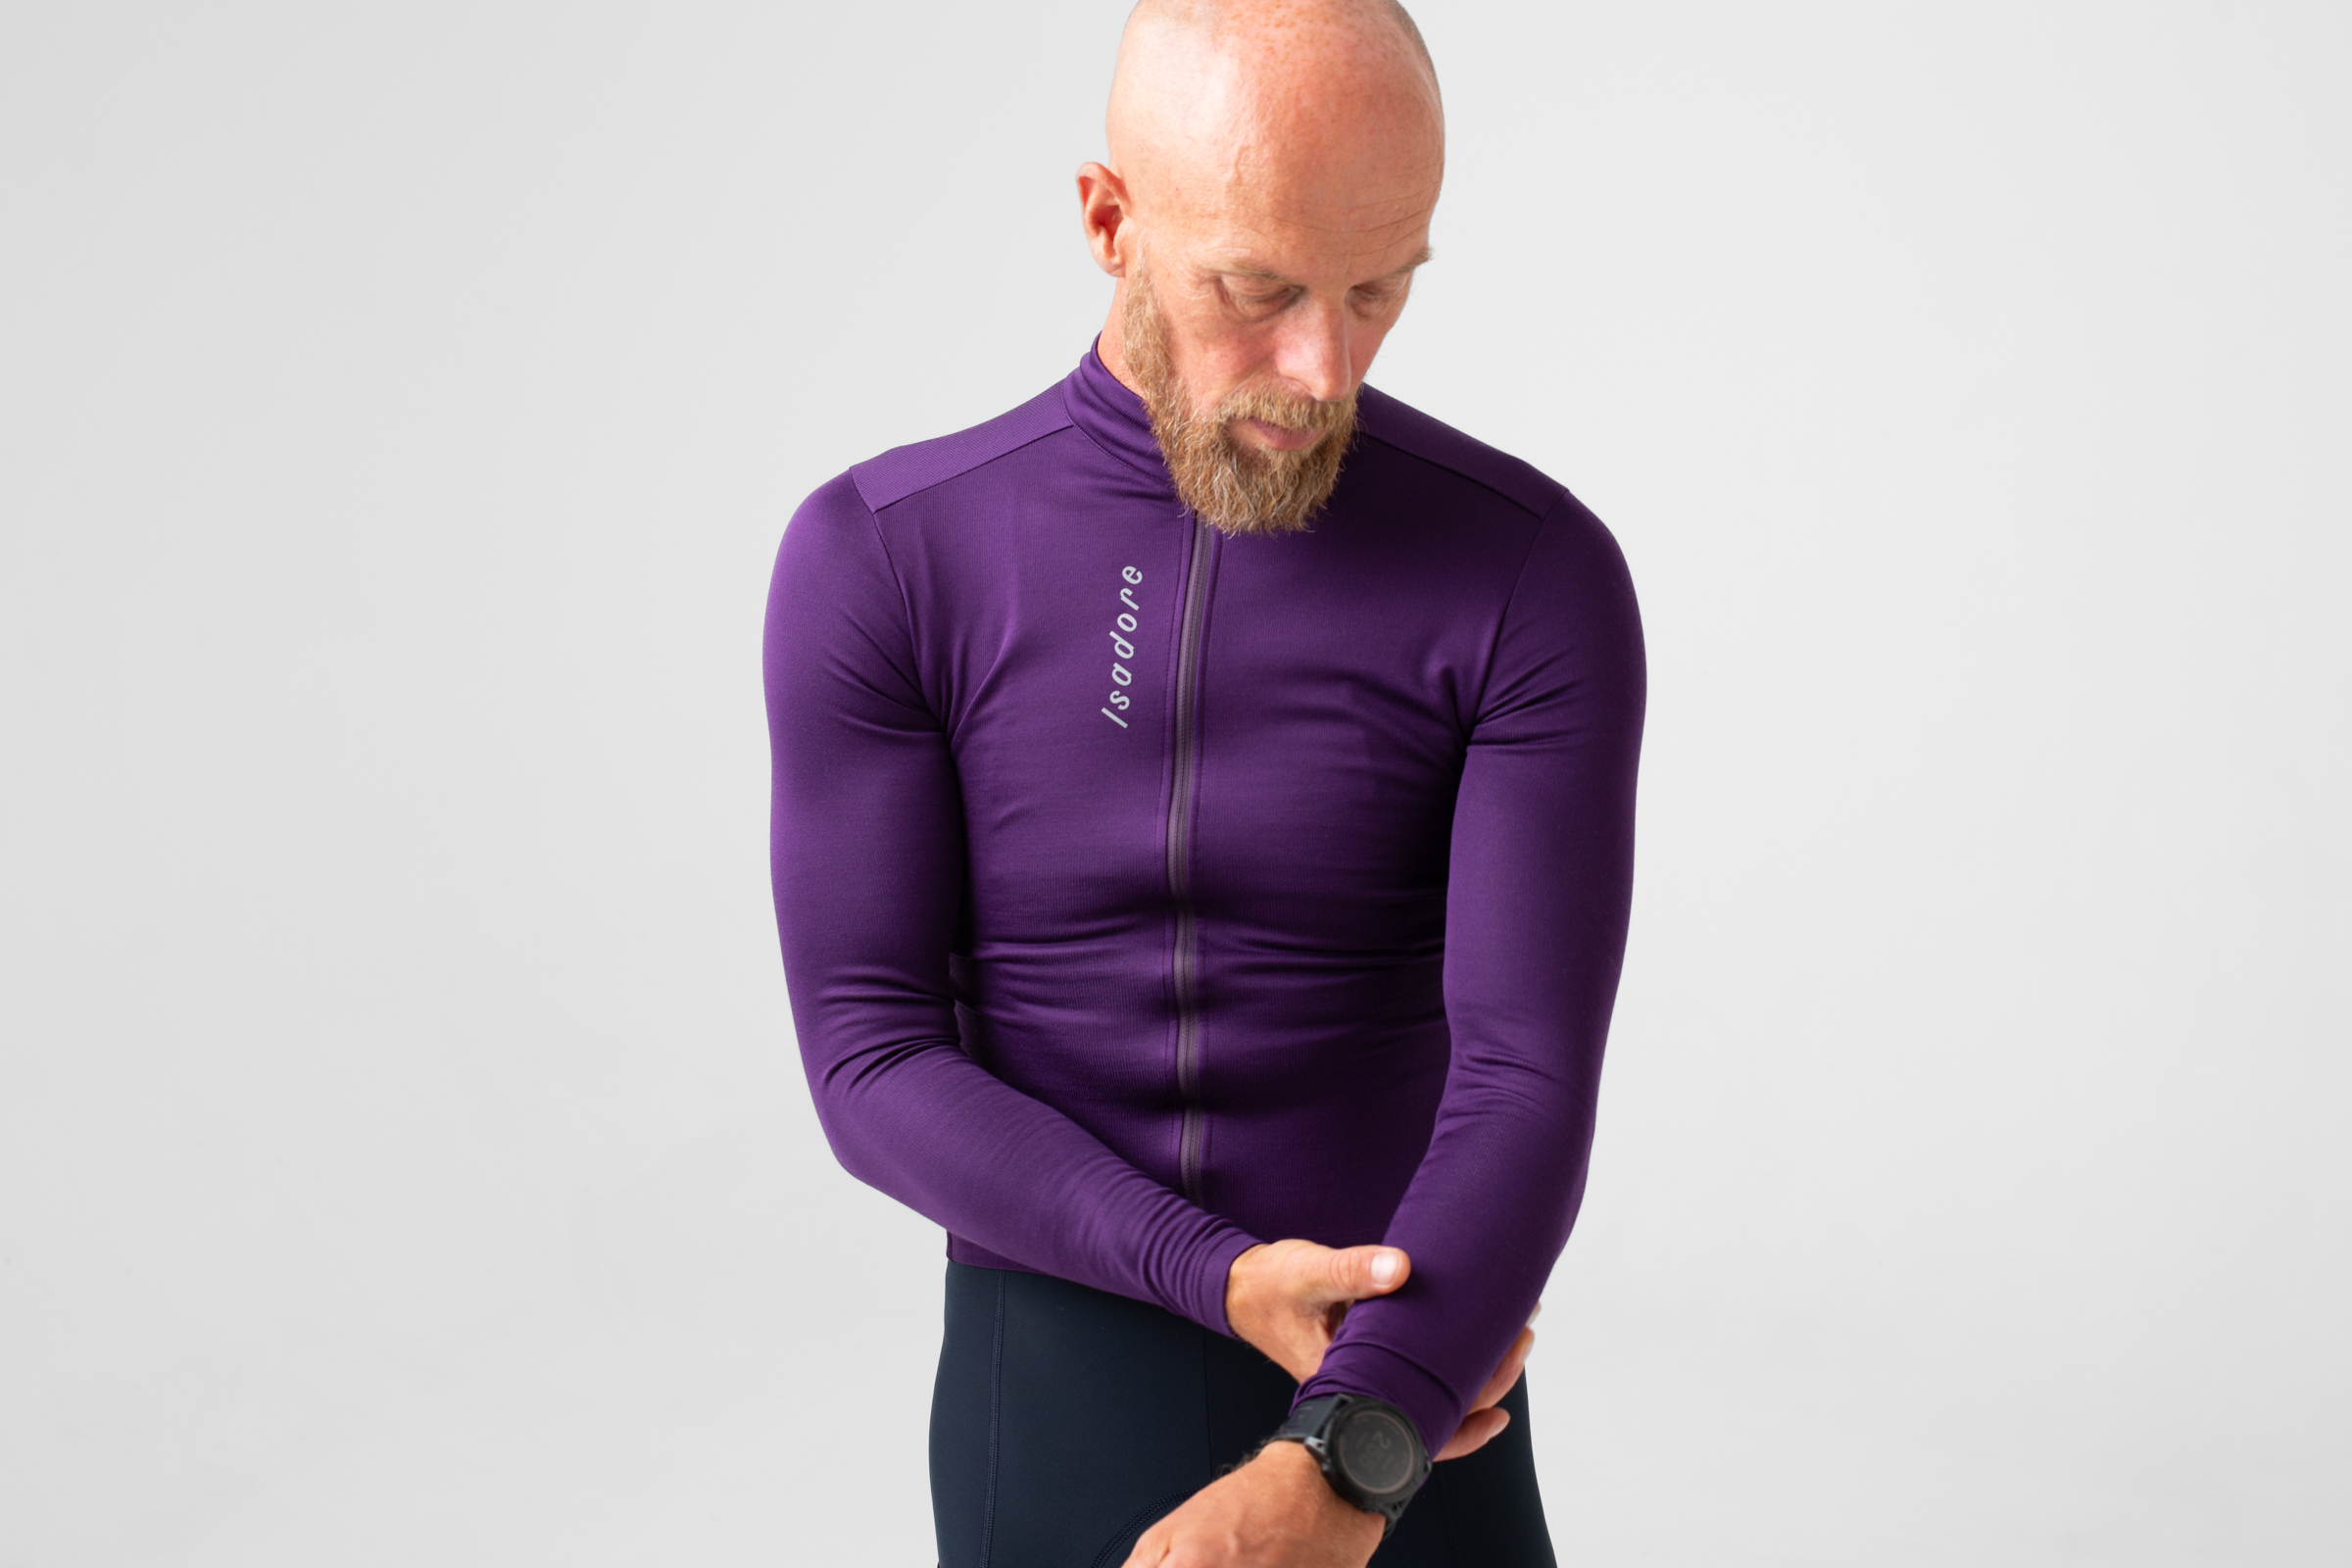 Signature Thermal Long Sleeve Jersey Blackberry Cordial